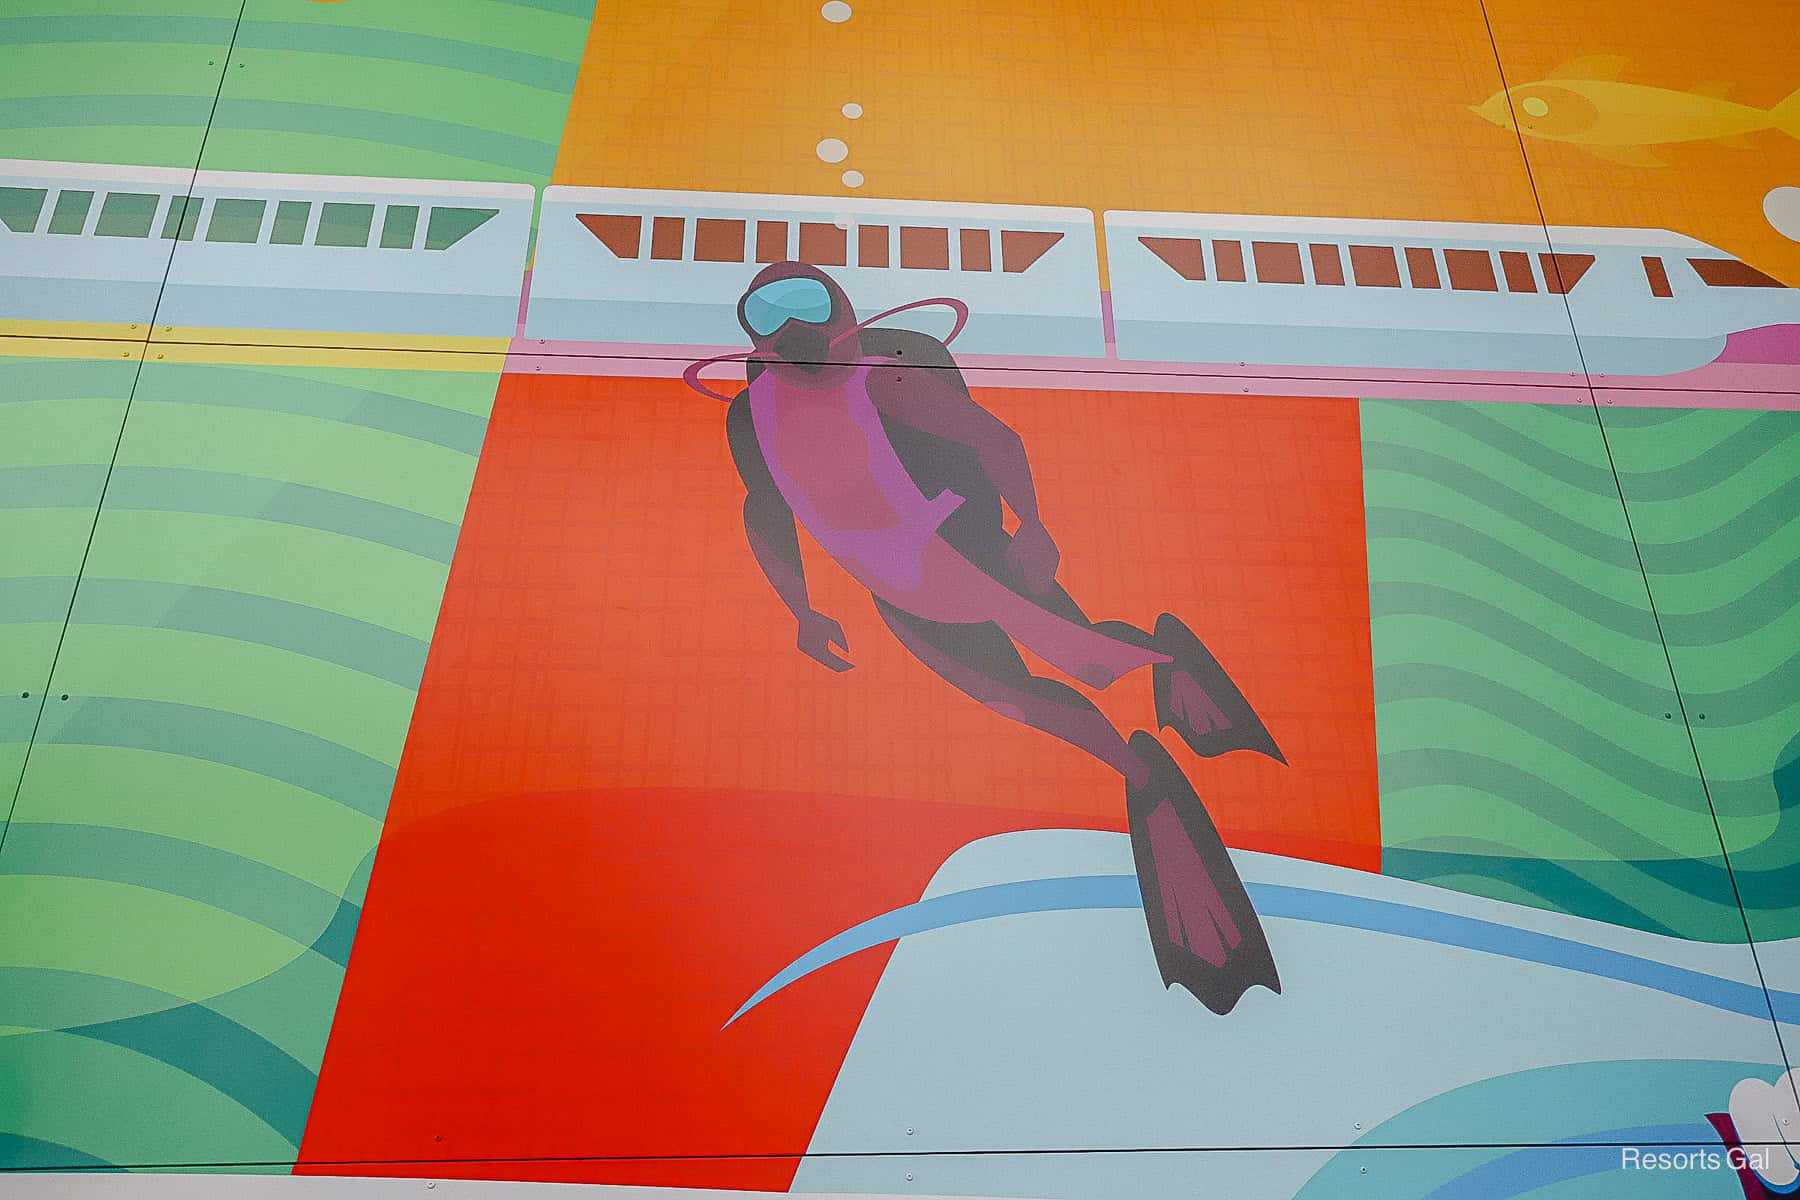 a diver mural as reference to the Living Seas 